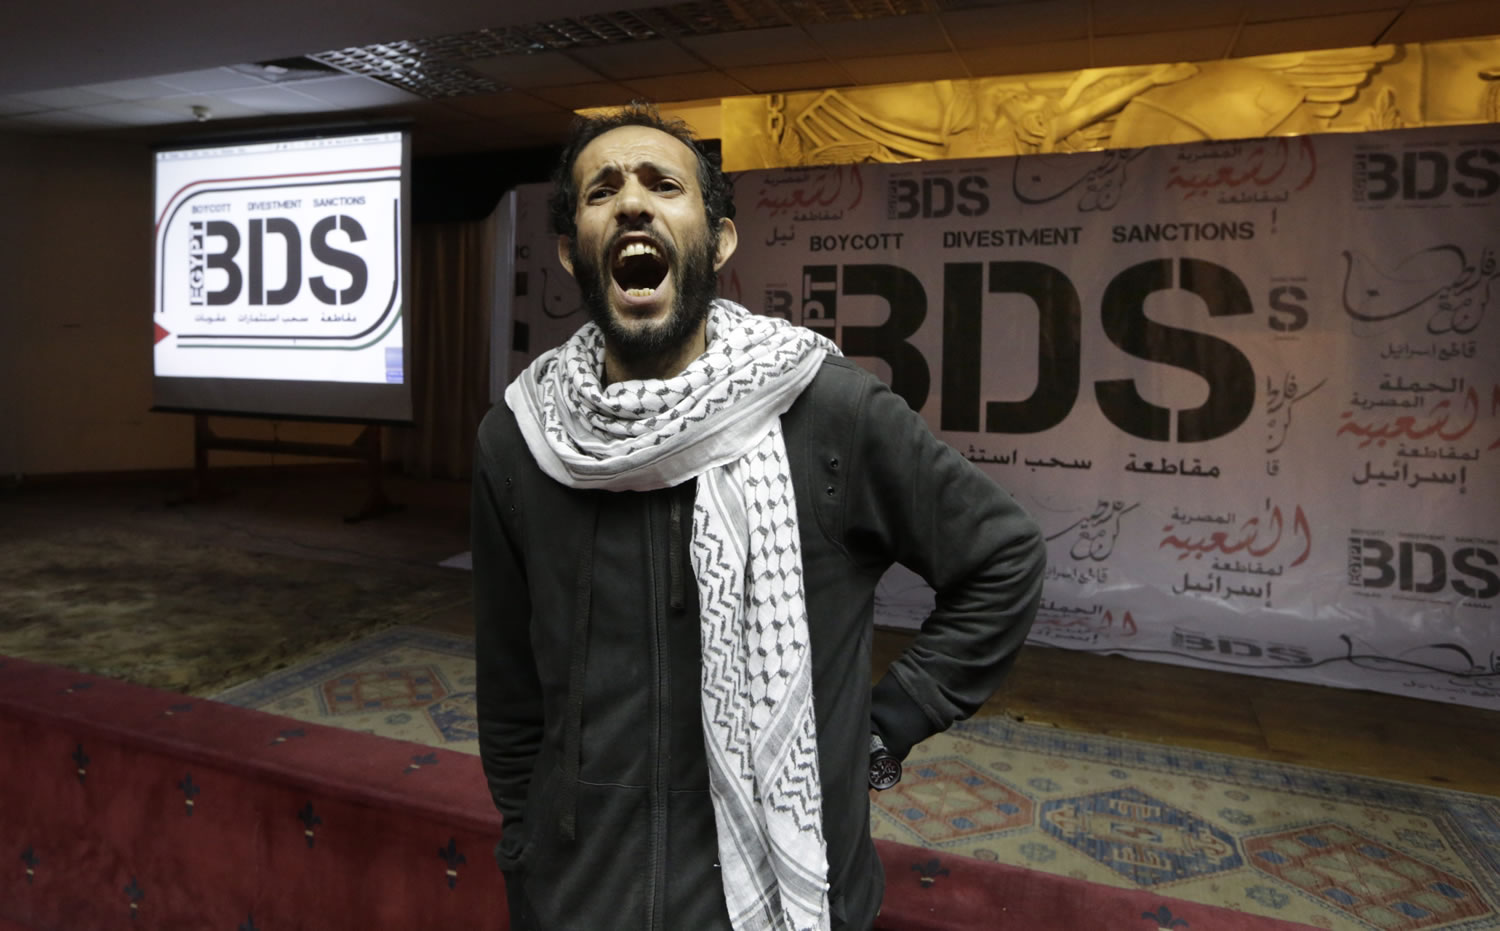 An Egyptian man shouts anti-Israeli slogans in front of banners with the Boycott, Divestment and Sanctions logo during the launch of the Egyptian campaign that urges boycott, divestment and sanctions against Israel and Israeli-made goods, at the Egyptian Journalists&#039; Syndicate in Cairo, Egypt. Israel is using its world-leading expertise in cyber security to take on the growing threat posed by the global pro-Palestinian movement to boycott Israel.